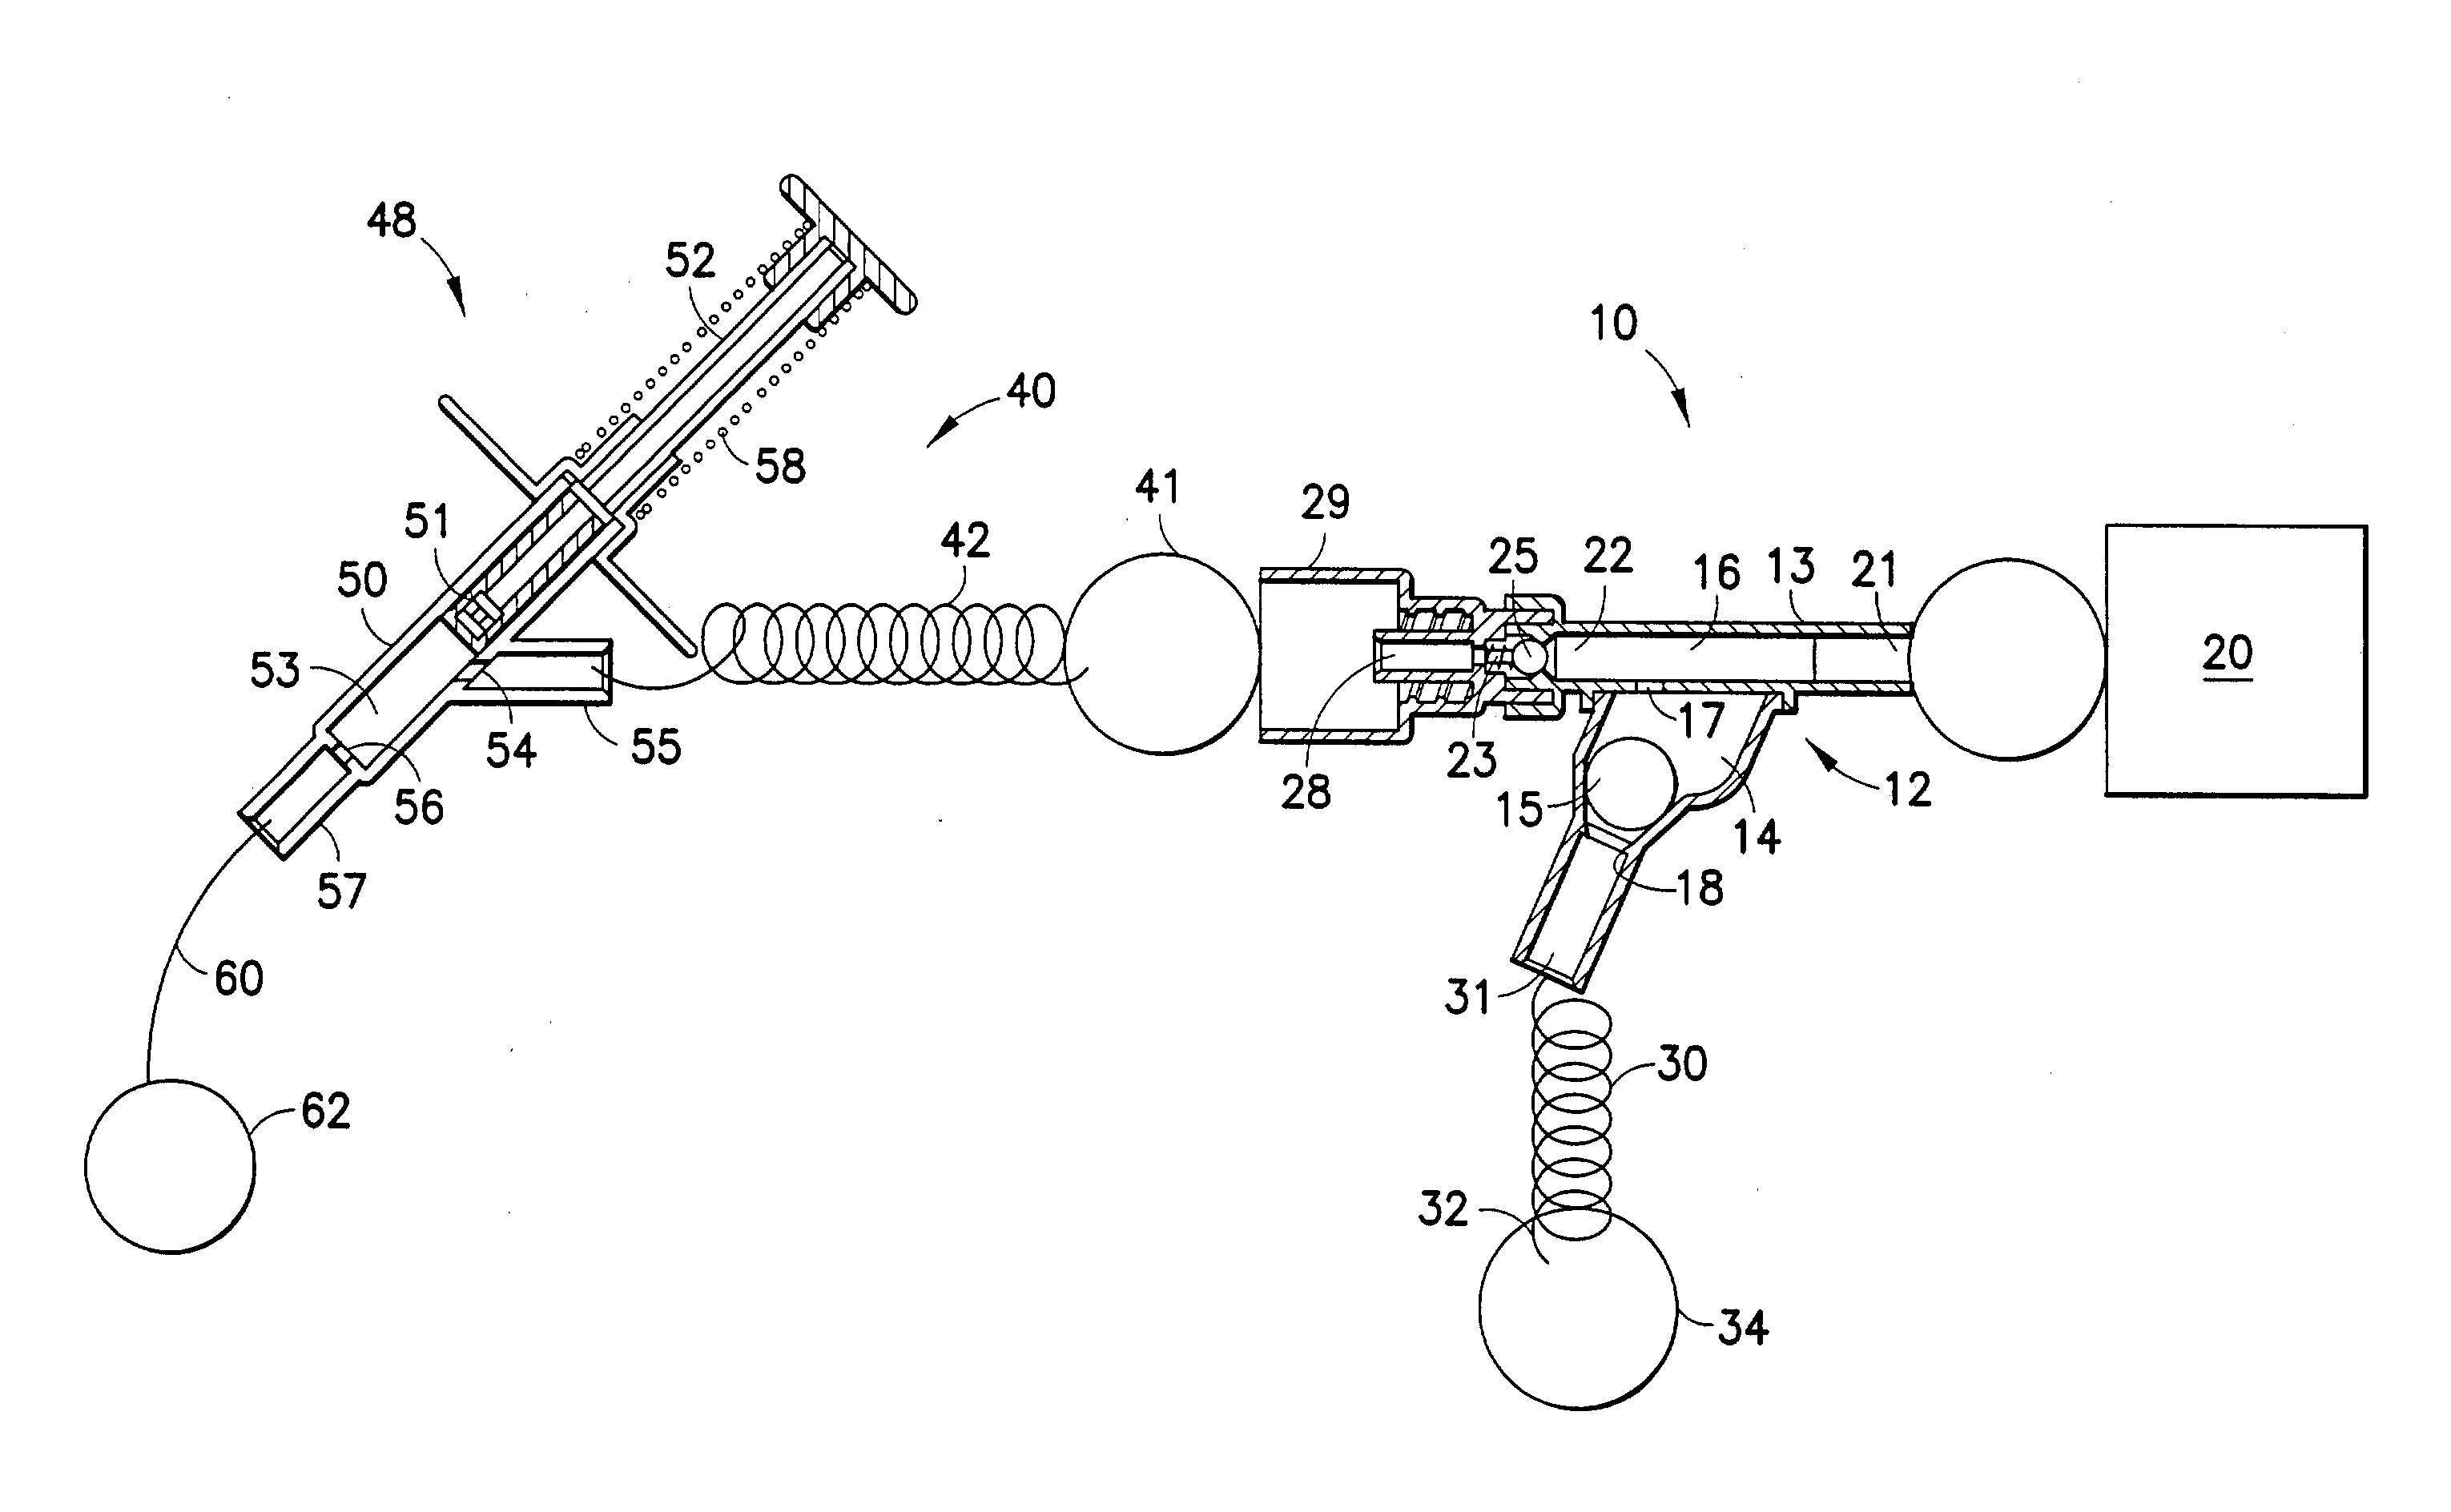 Method and apparatus for the delivery of contrast fluid to a patient